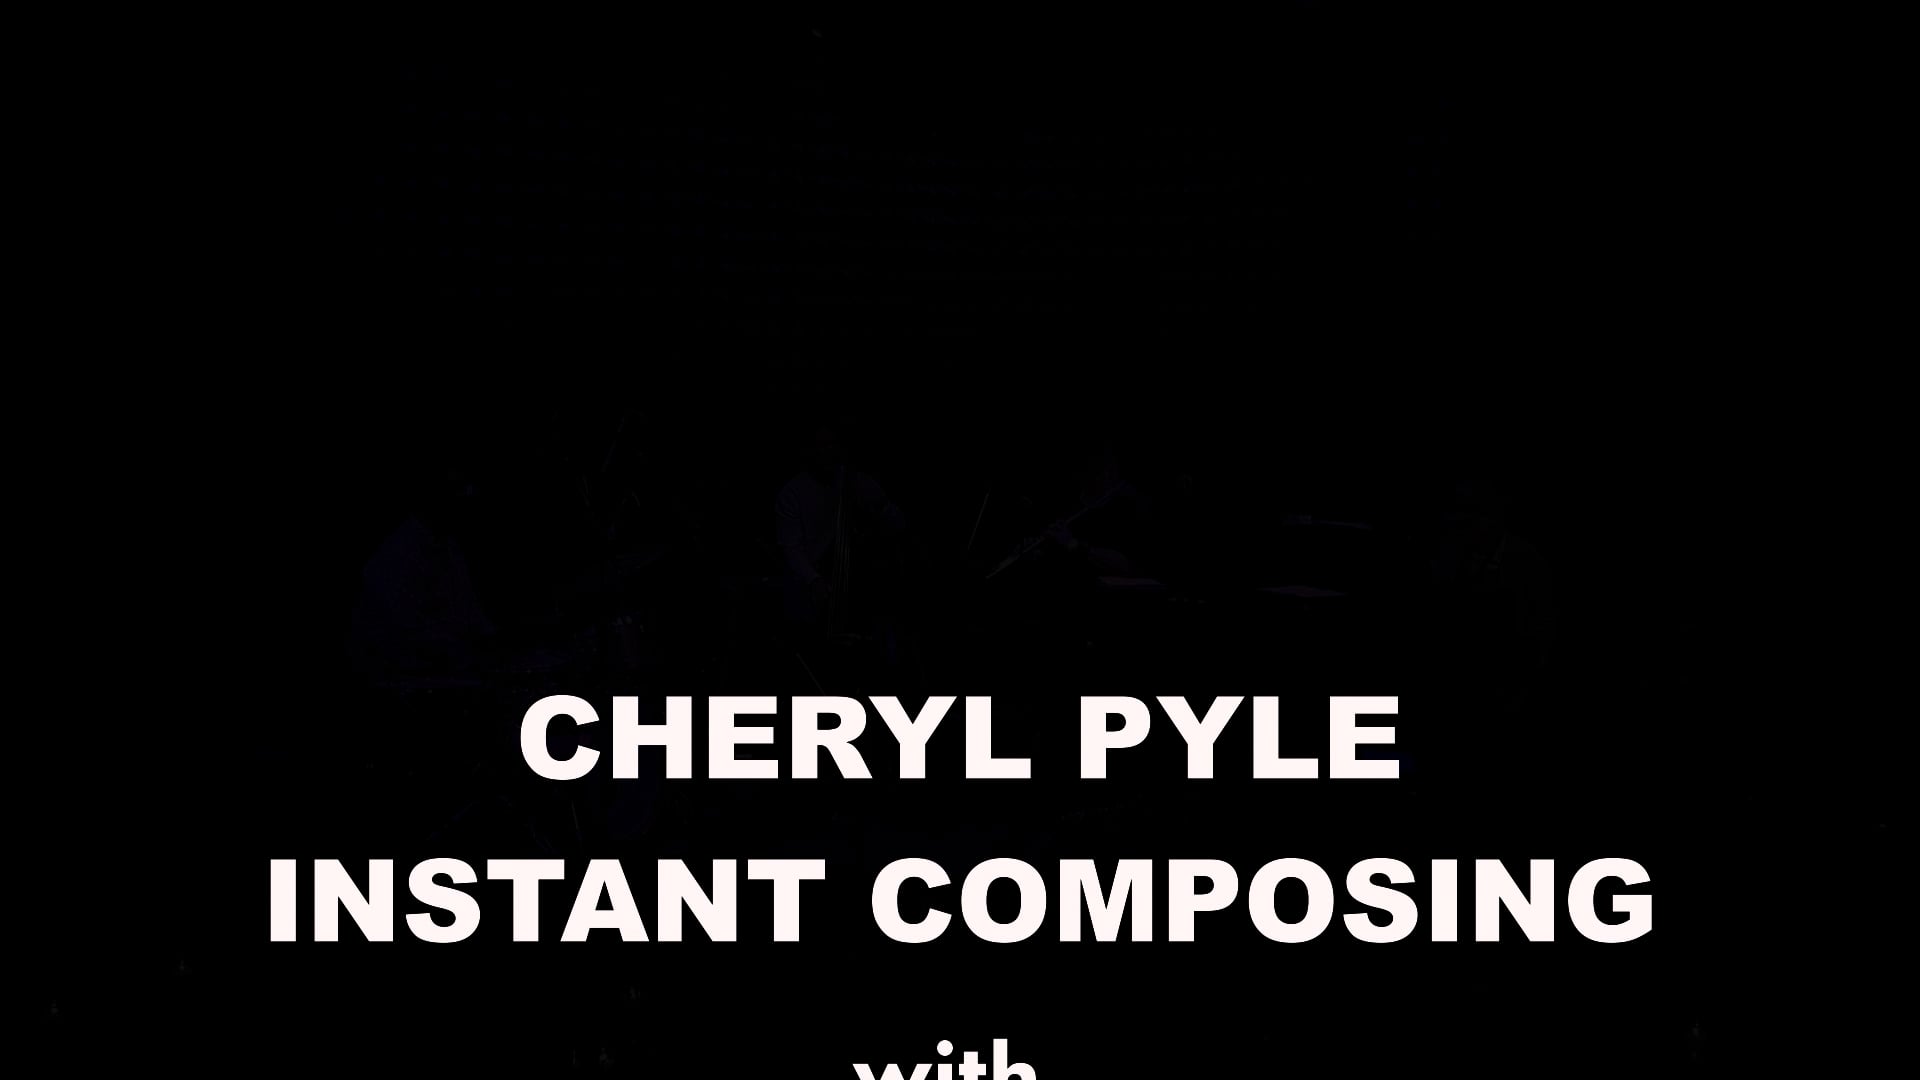 CHERYL PYLE Instant Composing with NYJS 2